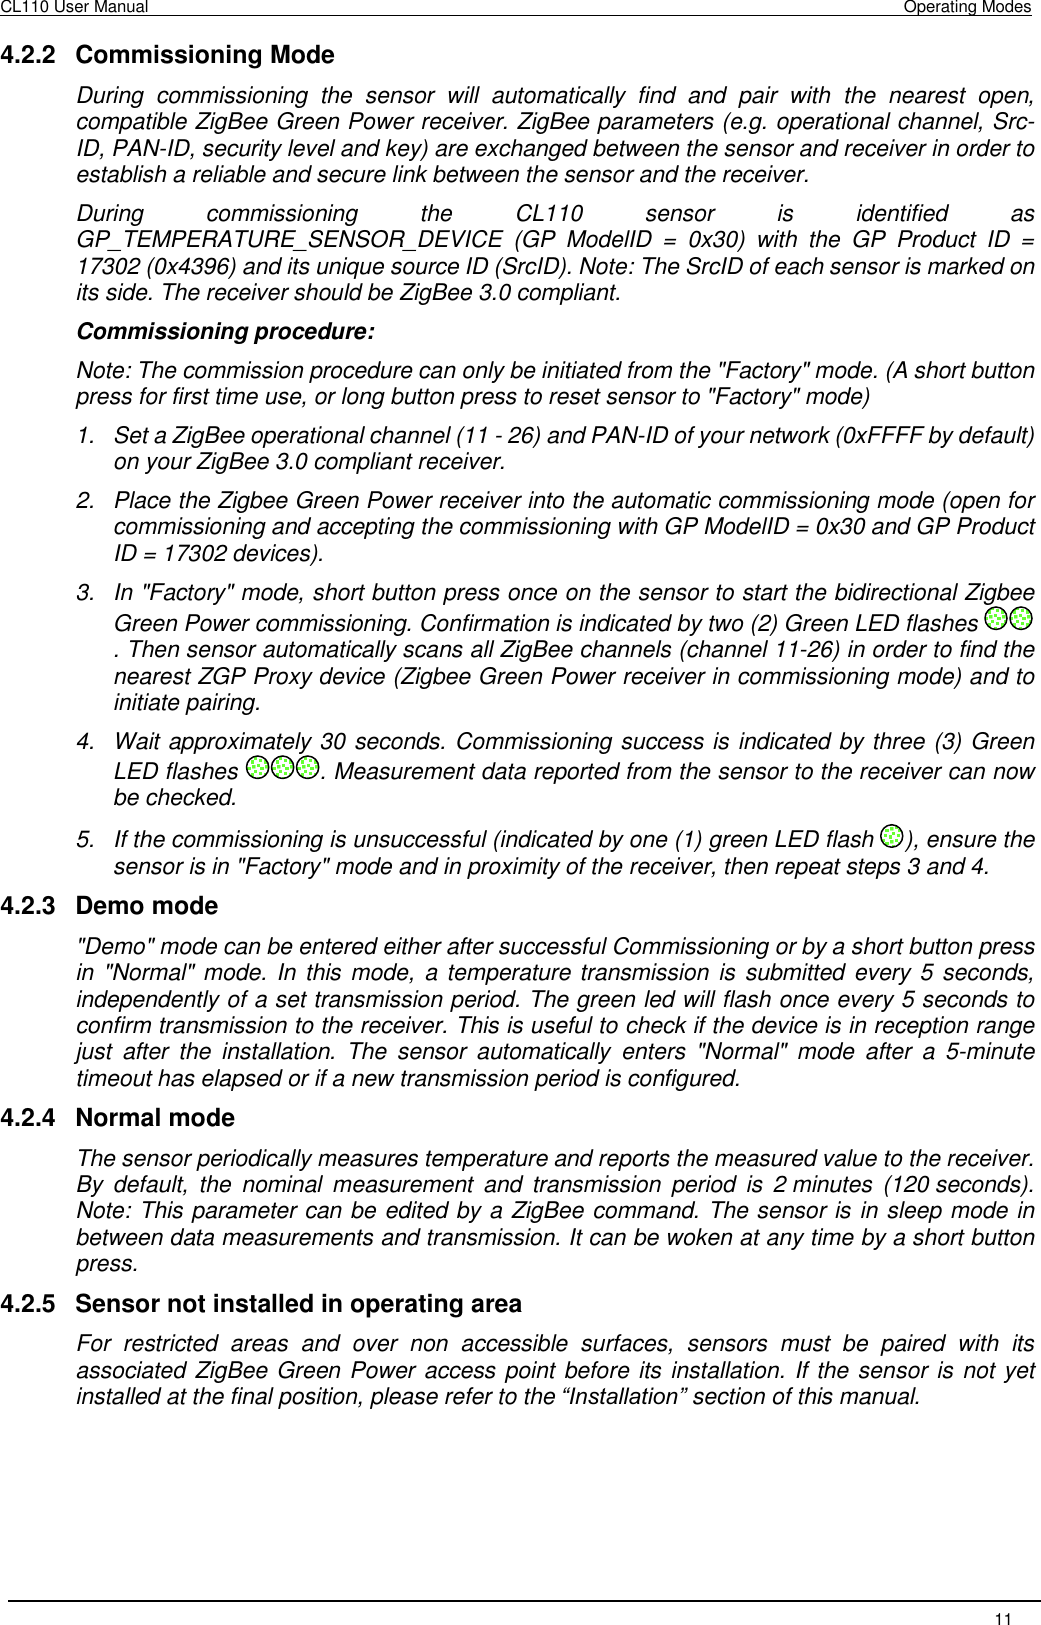 CL110 User Manual    Operating Modes   11  4.2.2  Commissioning Mode During  commissioning  the  sensor  will  automatically  find  and  pair  with  the  nearest  open, compatible ZigBee Green Power receiver. ZigBee parameters (e.g. operational channel, Src-ID, PAN-ID, security level and key) are exchanged between the sensor and receiver in order to establish a reliable and secure link between the sensor and the receiver. During  commissioning  the  CL110  sensor  is  identified  as GP_TEMPERATURE_SENSOR_DEVICE  (GP  ModelID  =  0x30)  with  the  GP  Product  ID  = 17302 (0x4396) and its unique source ID (SrcID). Note: The SrcID of each sensor is marked on its side. The receiver should be ZigBee 3.0 compliant. Commissioning procedure: Note: The commission procedure can only be initiated from the &quot;Factory&quot; mode. (A short button press for first time use, or long button press to reset sensor to &quot;Factory&quot; mode) 1.  Set a ZigBee operational channel (11 - 26) and PAN-ID of your network (0xFFFF by default) on your ZigBee 3.0 compliant receiver. 2.  Place the Zigbee Green Power receiver into the automatic commissioning mode (open for commissioning and accepting the commissioning with GP ModelID = 0x30 and GP Product ID = 17302 devices). 3.  In &quot;Factory&quot; mode, short button press once on the sensor to start the bidirectional Zigbee Green Power commissioning. Confirmation is indicated by two (2) Green LED flashes . Then sensor automatically scans all ZigBee channels (channel 11-26) in order to find the nearest ZGP Proxy device (Zigbee Green Power receiver in commissioning mode) and to initiate pairing. 4.  Wait approximately 30 seconds. Commissioning success is indicated by three (3) Green LED flashes  . Measurement data reported from the sensor to the receiver can now be checked. 5.  If the commissioning is unsuccessful (indicated by one (1) green LED flash  ), ensure the sensor is in &quot;Factory&quot; mode and in proximity of the receiver, then repeat steps 3 and 4. 4.2.3  Demo mode &quot;Demo&quot; mode can be entered either after successful Commissioning or by a short button press in  &quot;Normal&quot; mode. In this mode,  a temperature transmission is  submitted every 5 seconds, independently of a set transmission period. The green led will flash once every 5 seconds to confirm transmission to the receiver. This is useful to check if the device is in reception range just  after  the  installation.  The  sensor  automatically  enters  &quot;Normal&quot;  mode  after  a  5-minute timeout has elapsed or if a new transmission period is configured. 4.2.4  Normal mode The sensor periodically measures temperature and reports the measured value to the receiver. By  default,  the  nominal  measurement  and  transmission  period  is  2 minutes  (120 seconds). Note: This parameter can be edited by a ZigBee command. The sensor is in sleep mode in between data measurements and transmission. It can be woken at any time by a short button press. 4.2.5  Sensor not installed in operating area For  restricted  areas  and  over  non  accessible  surfaces,  sensors  must  be  paired  with  its associated ZigBee Green Power access point before its installation. If the sensor is not yet installed at the final position, please refer to the “Installation” section of this manual.